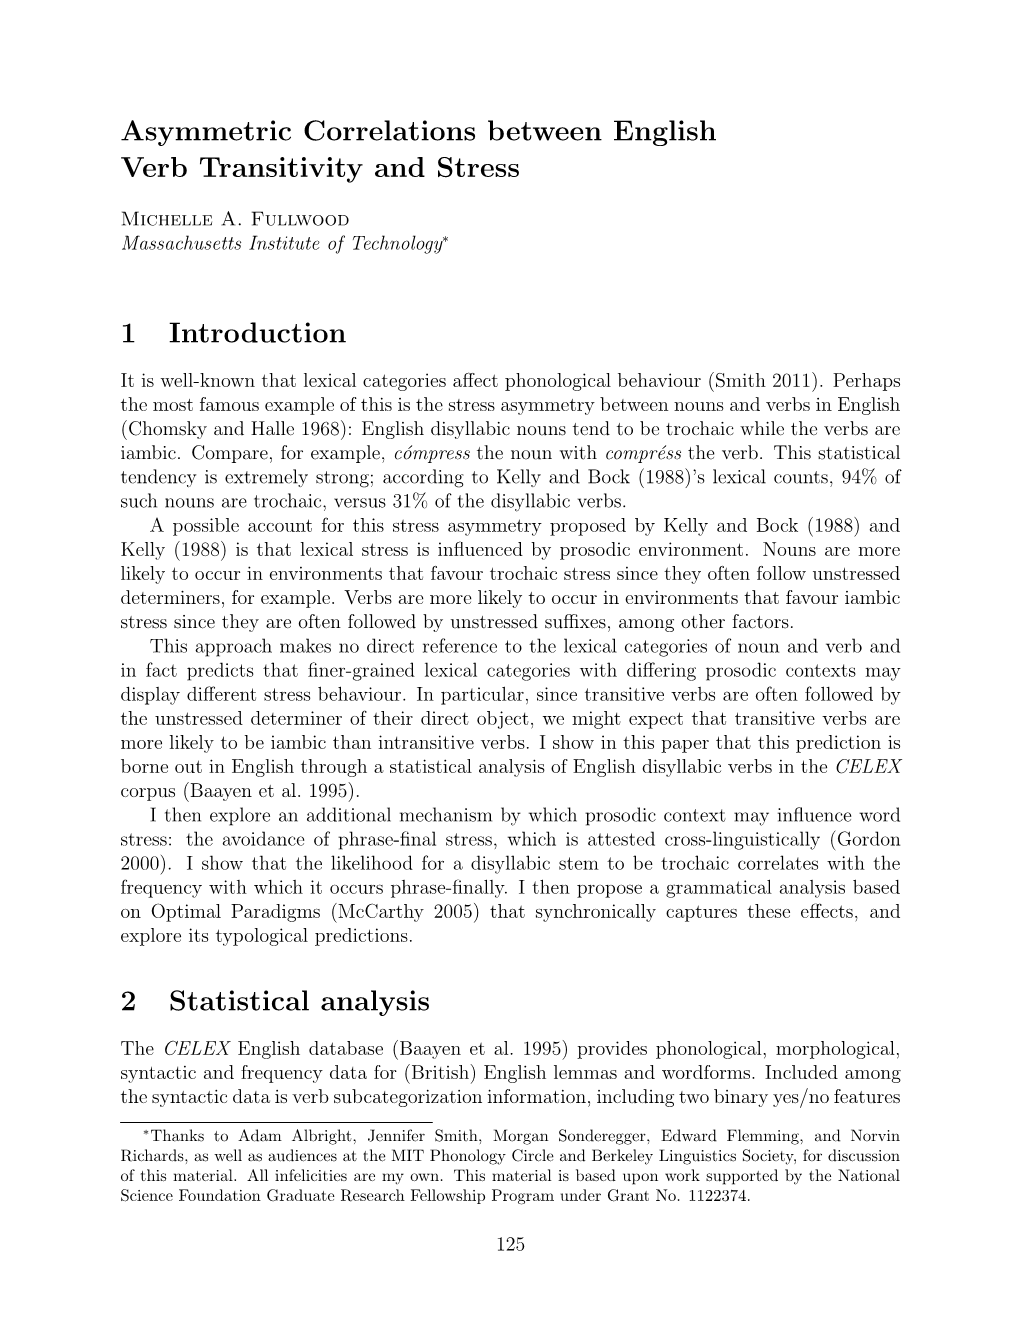 Asymmetric Correlations Between English Verb Transitivity and Stress 1 Introduction 2 Statistical Analysis